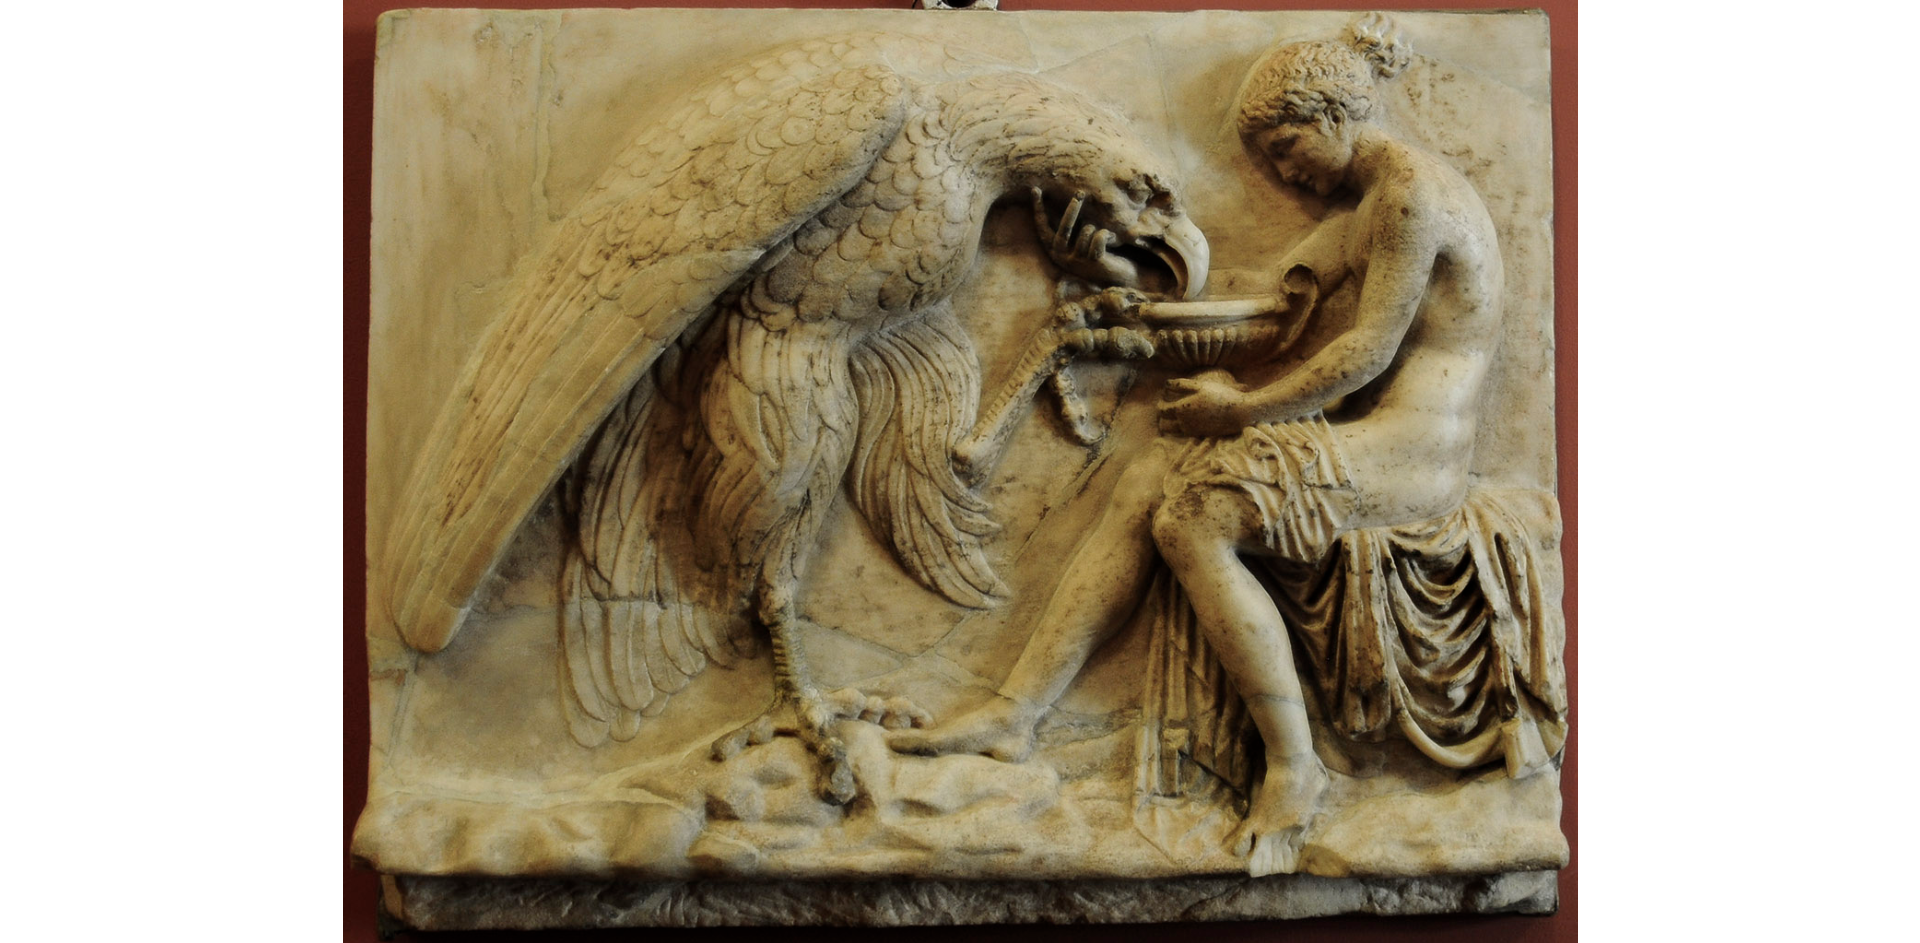 Ganymede feeding the eagle. Marble. Roman copy of late 1st cent. BCE after a Greek original.